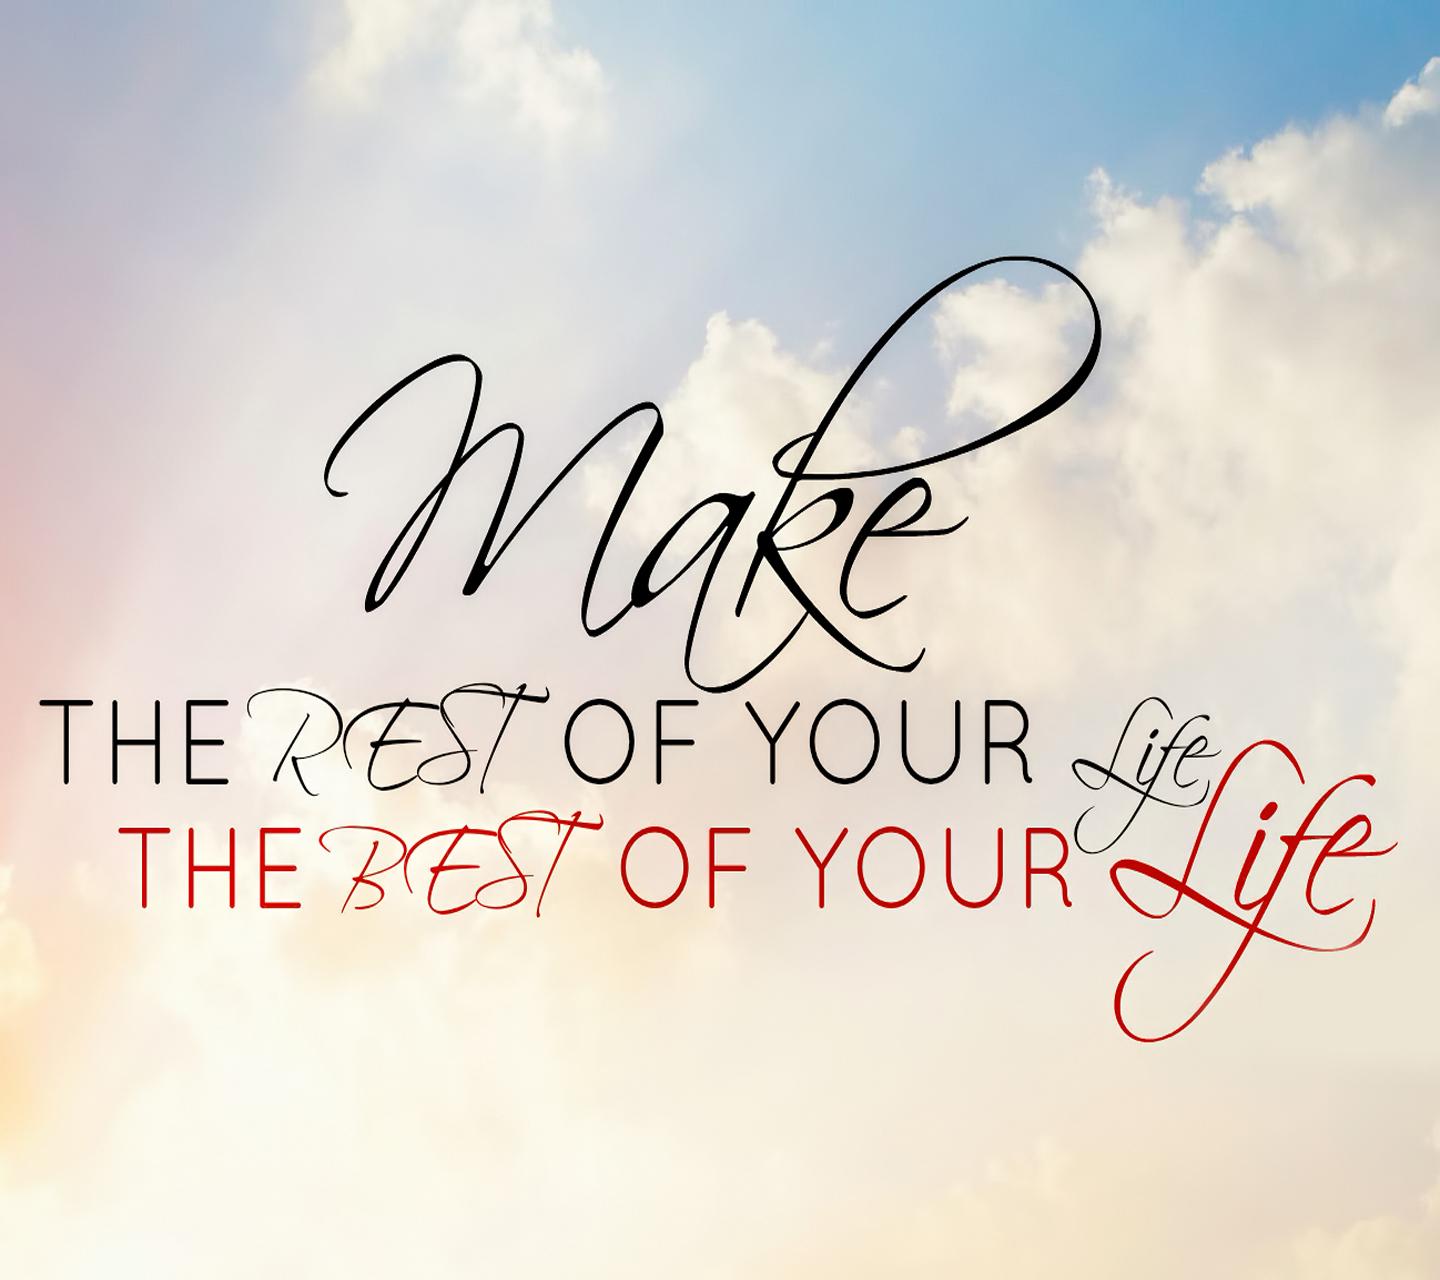 Download Your life hd wallpaper for laptop - Saying quote wallpapers for  your mobile cell phone